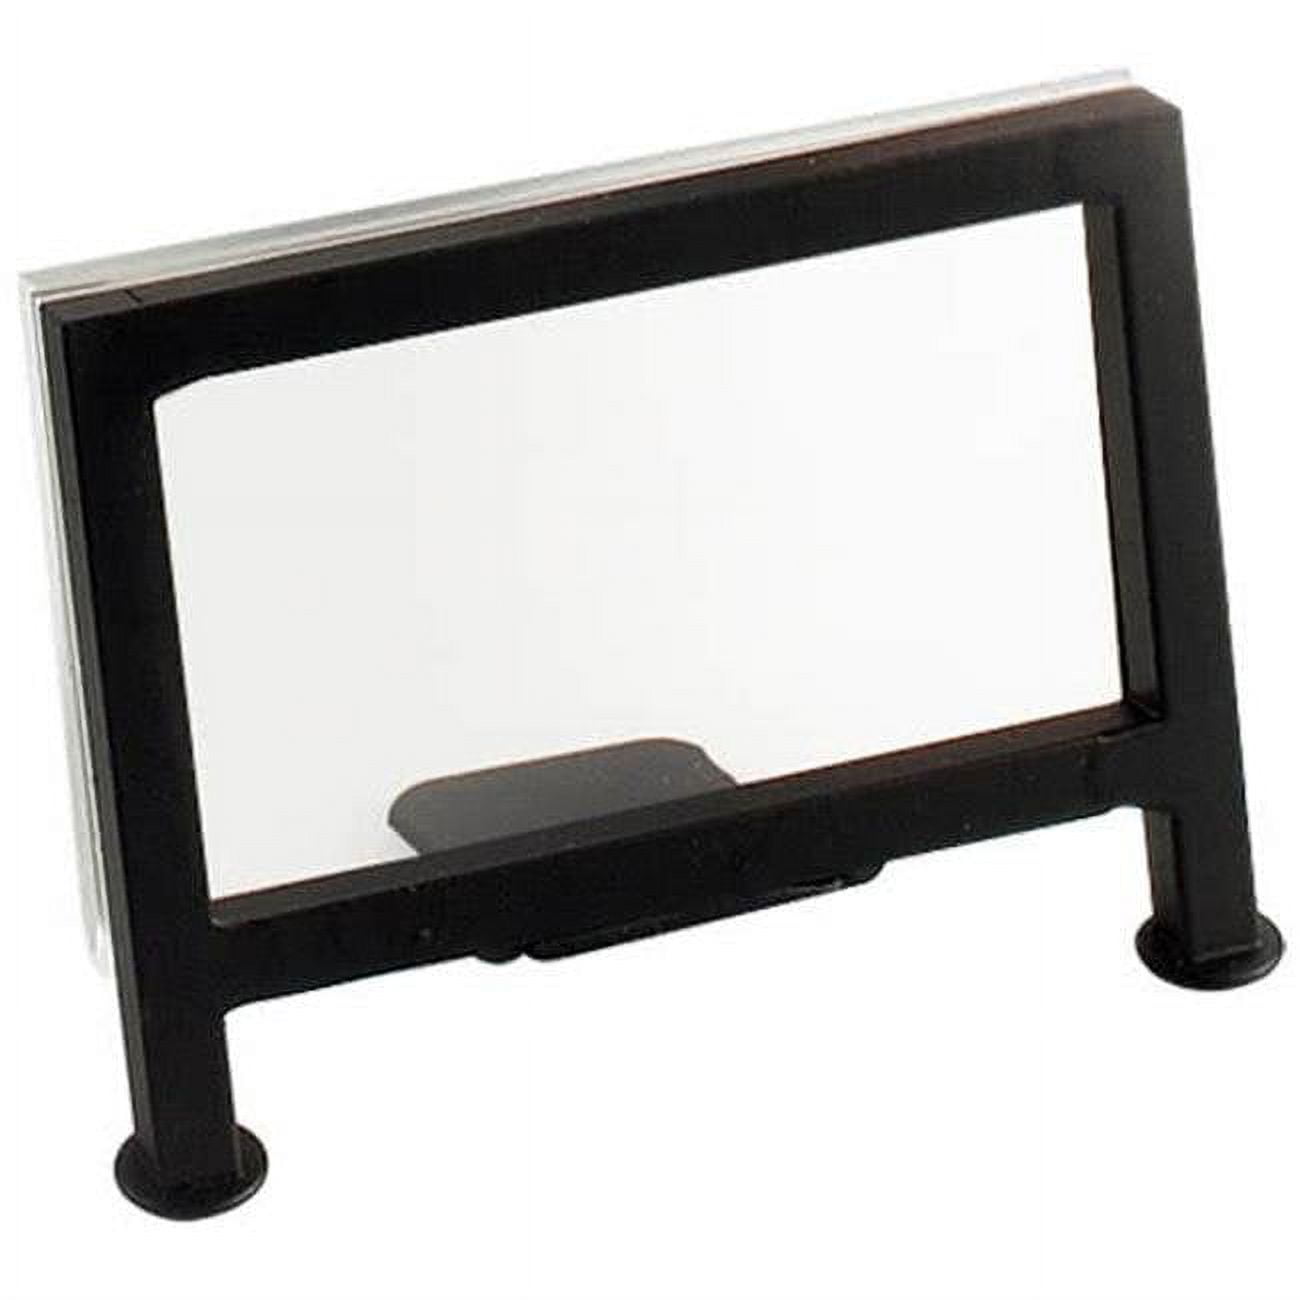 Picture of Cal Mil 1262 Iron Frame Displayette - 3.5 x 1 x 2 in.